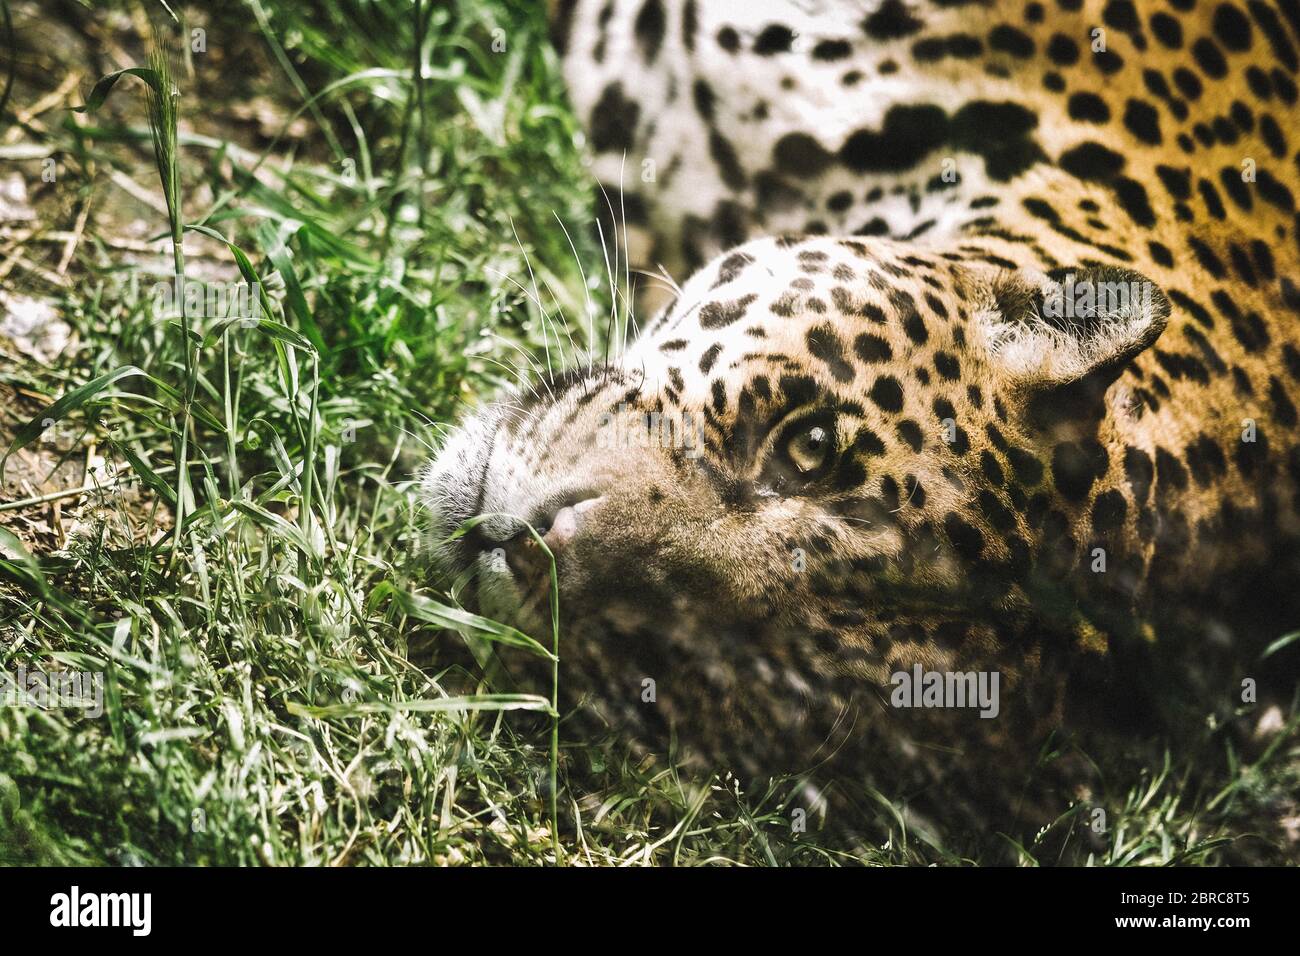 Murazzano, Italy. 20th May, 2020. A jaguar is seen at Langhe safari park in Murazzano, Italy, May 20, 2020. The Langhe safari park has been closed since March due to the COVID-19 pandemic. In order to continue feeding and taking care of the animals, the park has to seek help from restaurateurs, farmers and shopkeepers to donate food to feed the animals. Credit: Federico Tardito/Xinhua/Alamy Live News Stock Photo